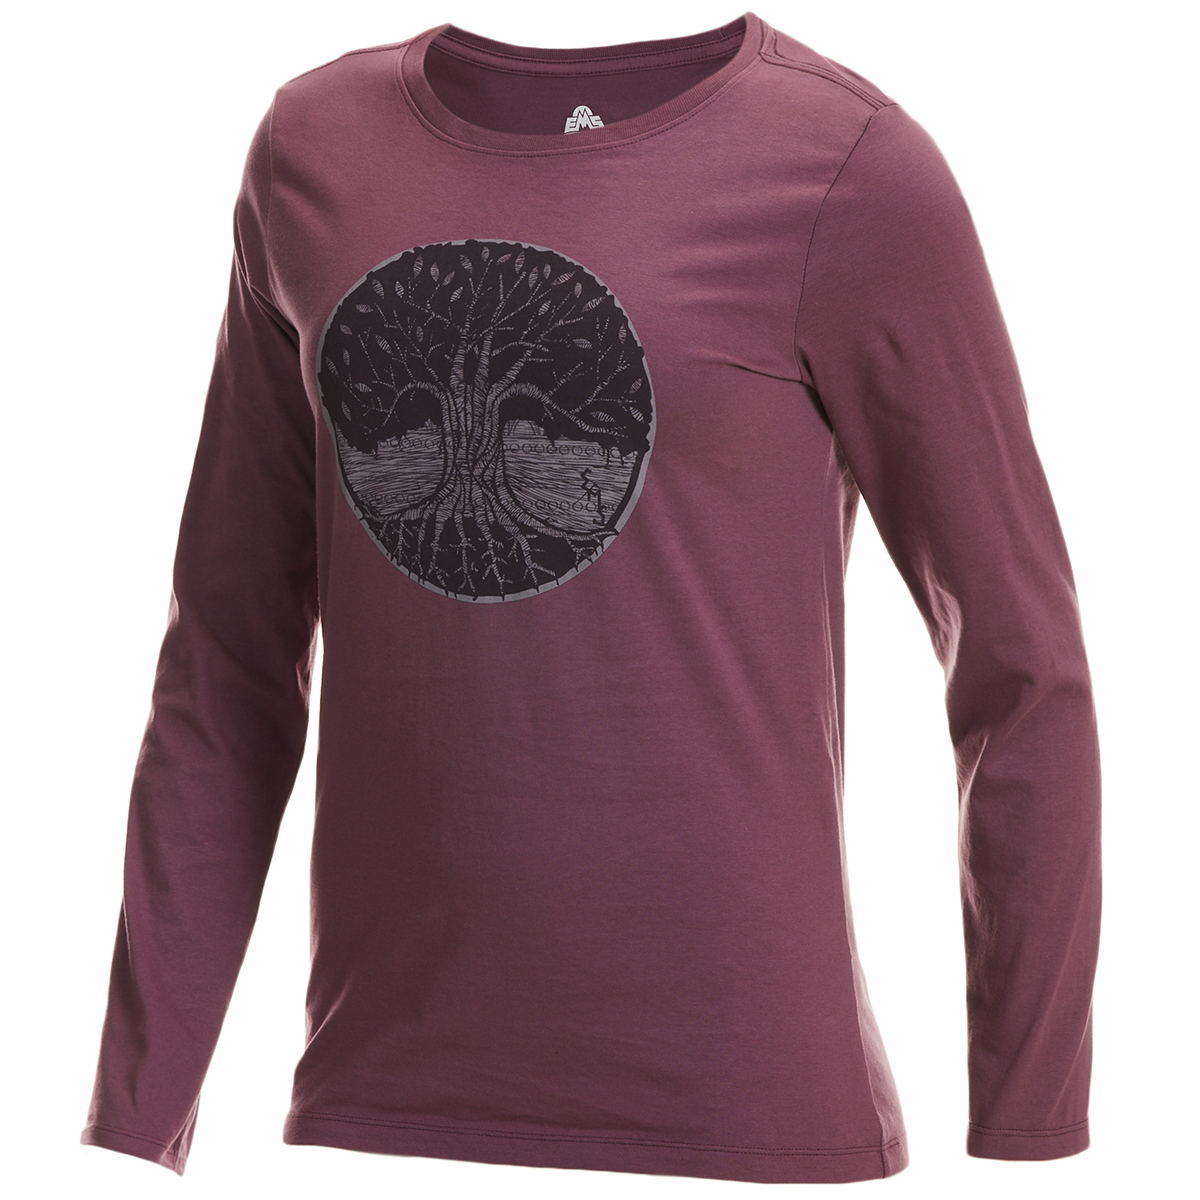 EMS Women's Grass Roots Long Sleeve Graphic Tee - Size L